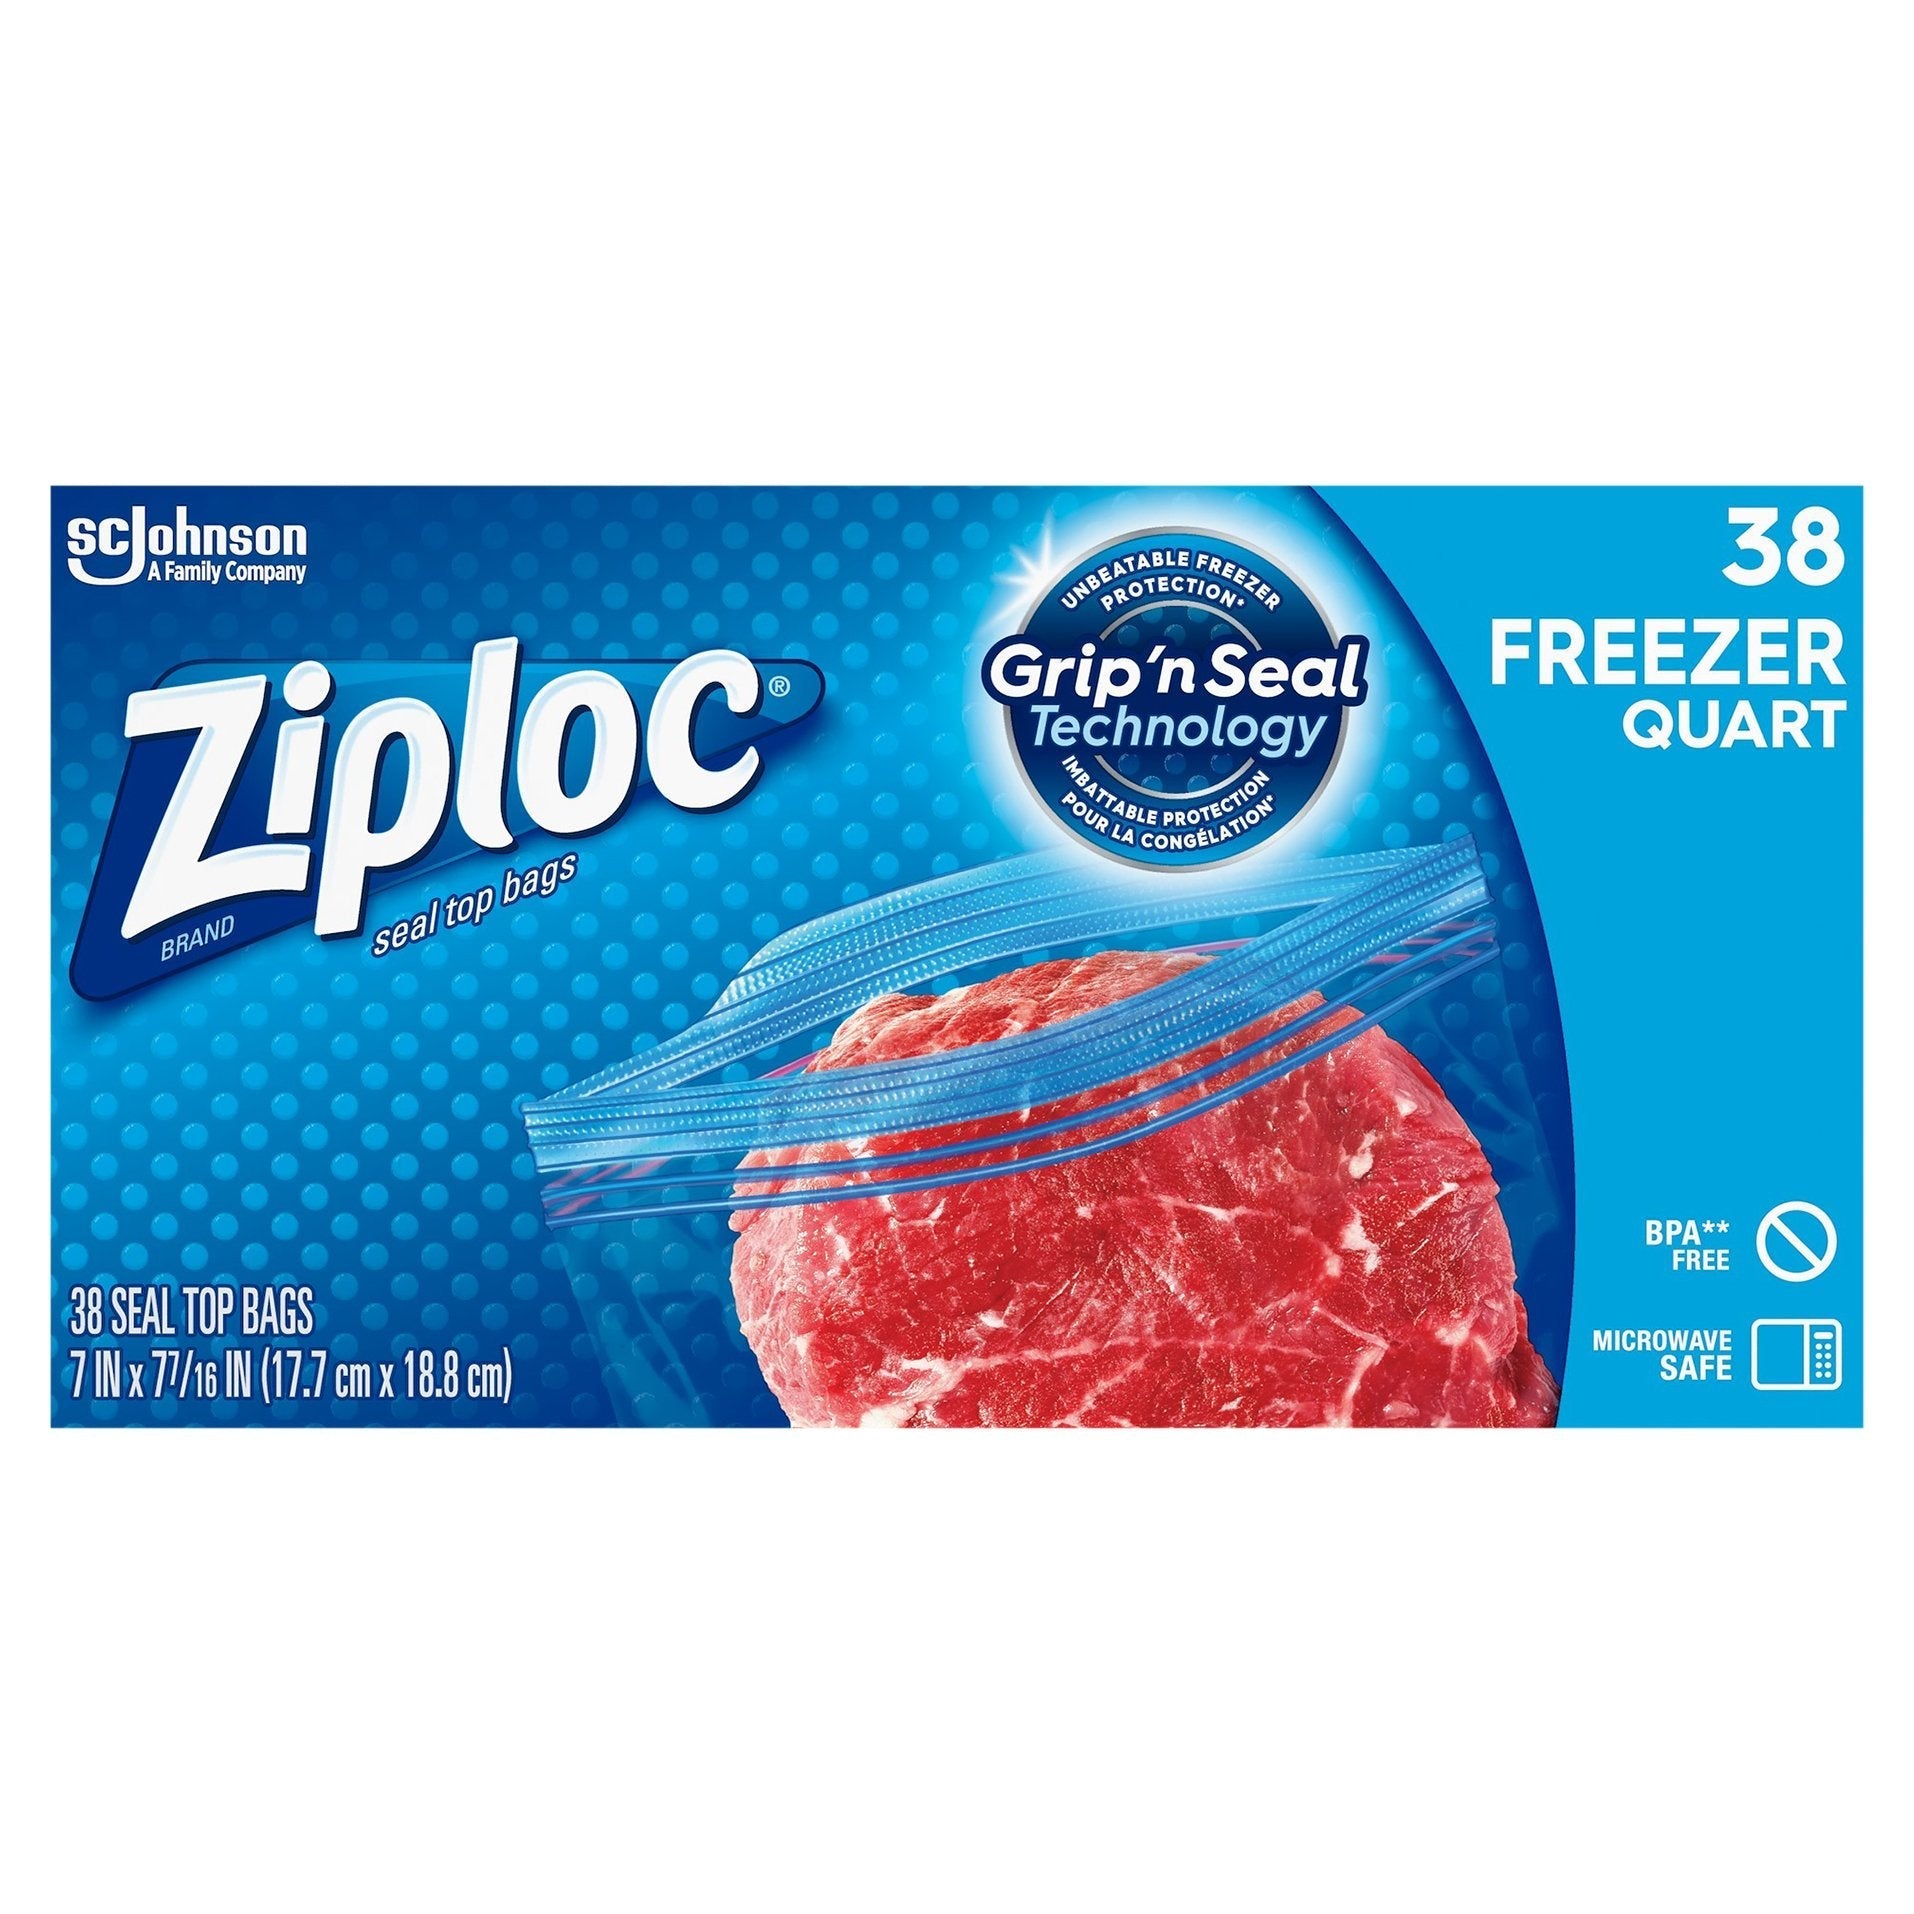 Ziploc Brand Freezer Quart Bags with Grip 'n Seal Technology, 75 Count